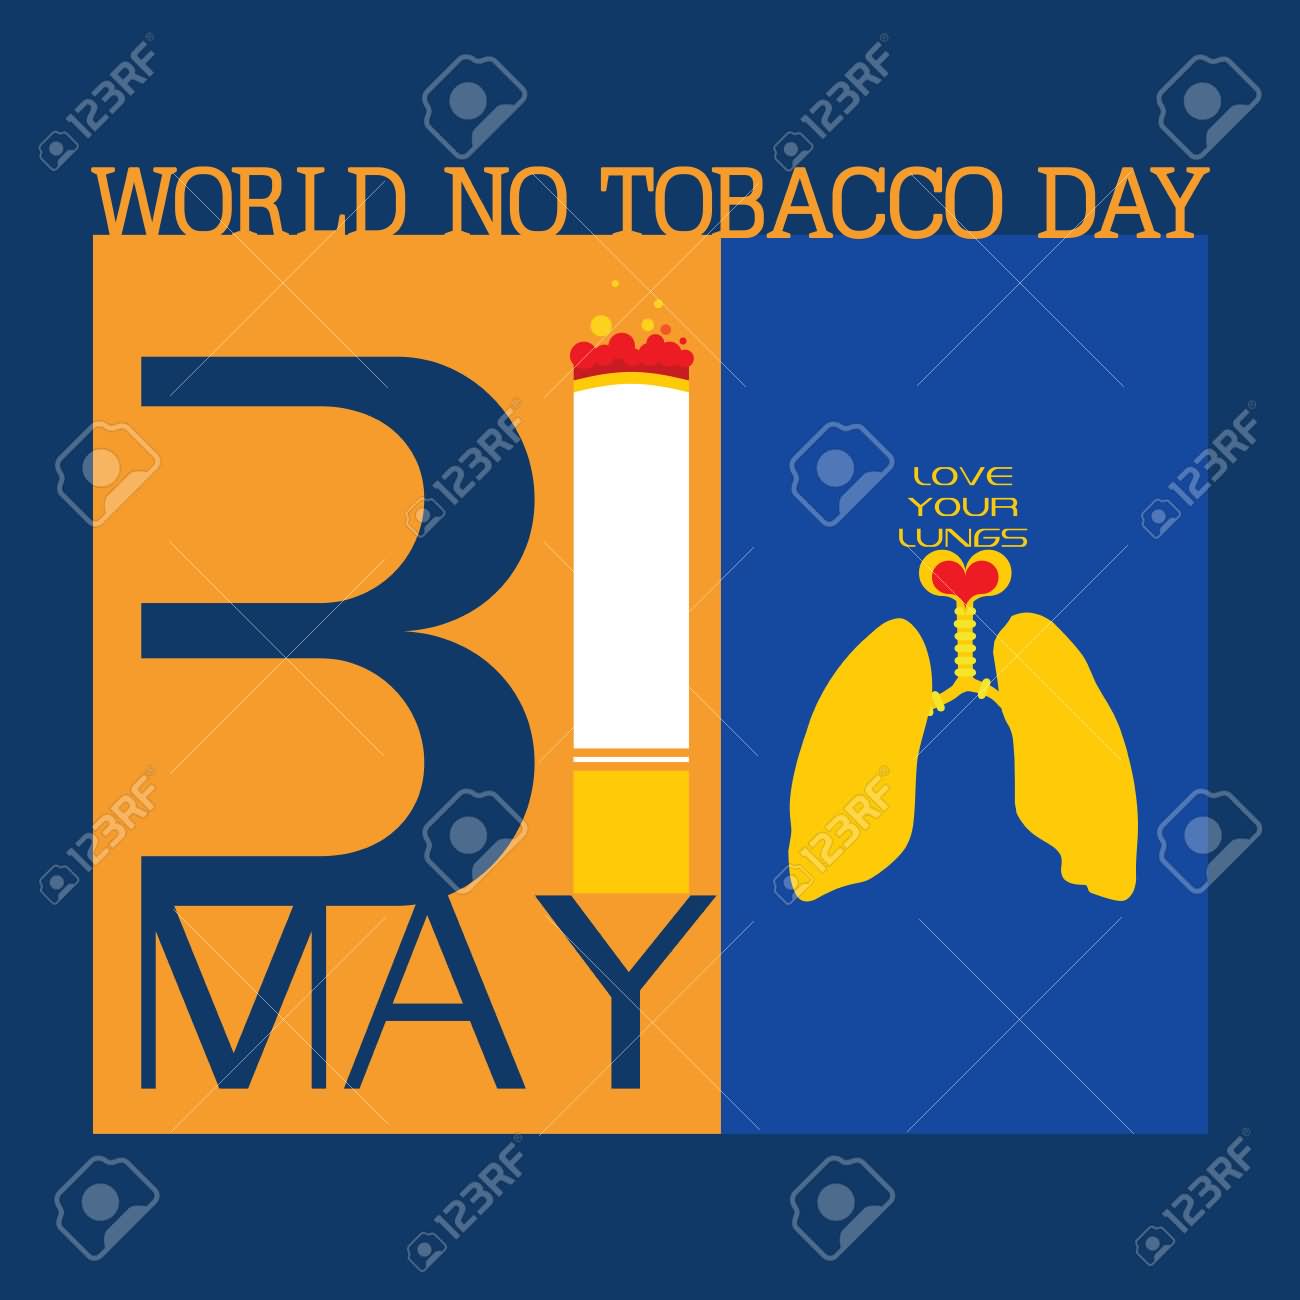 World No Tobacco Day 31 May Love Your Lungs